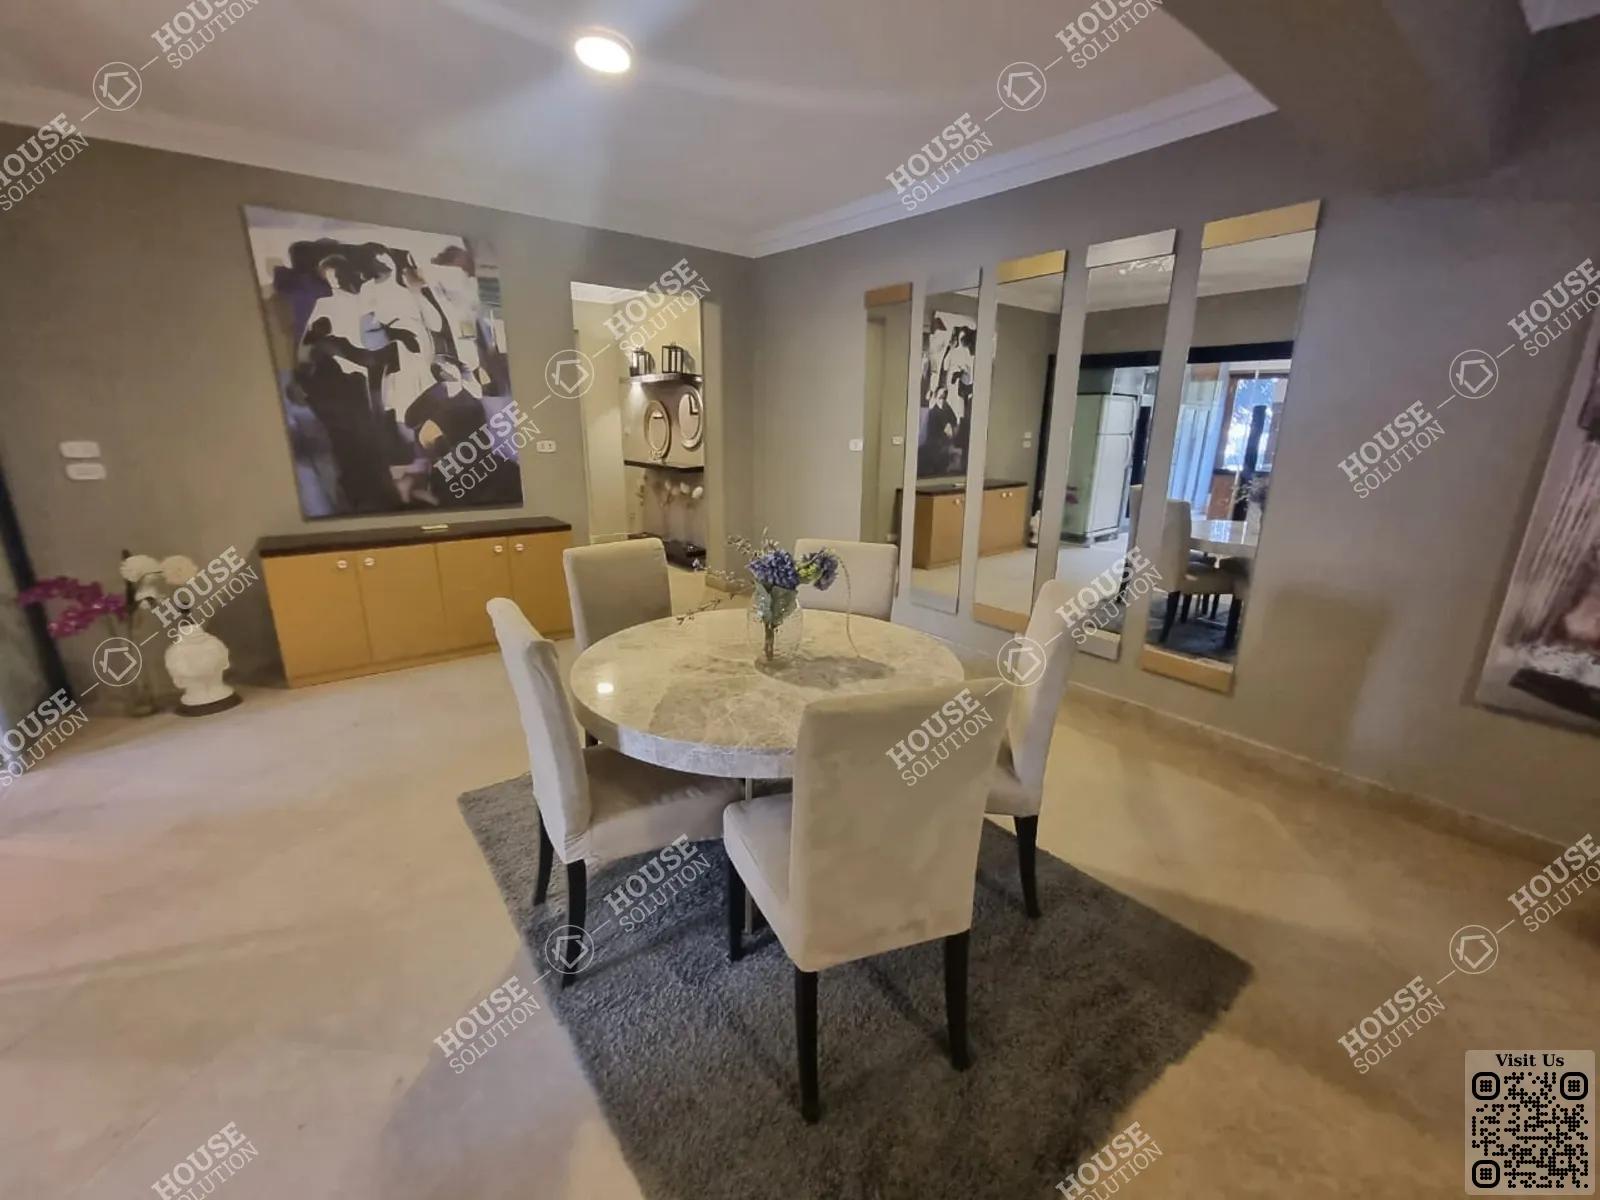 DINING AREA @ Apartments For Rent In Maadi Maadi Degla Area: 250 m² consists of 4 Bedrooms 3 Bathrooms Modern furnished 5 stars #5621-0